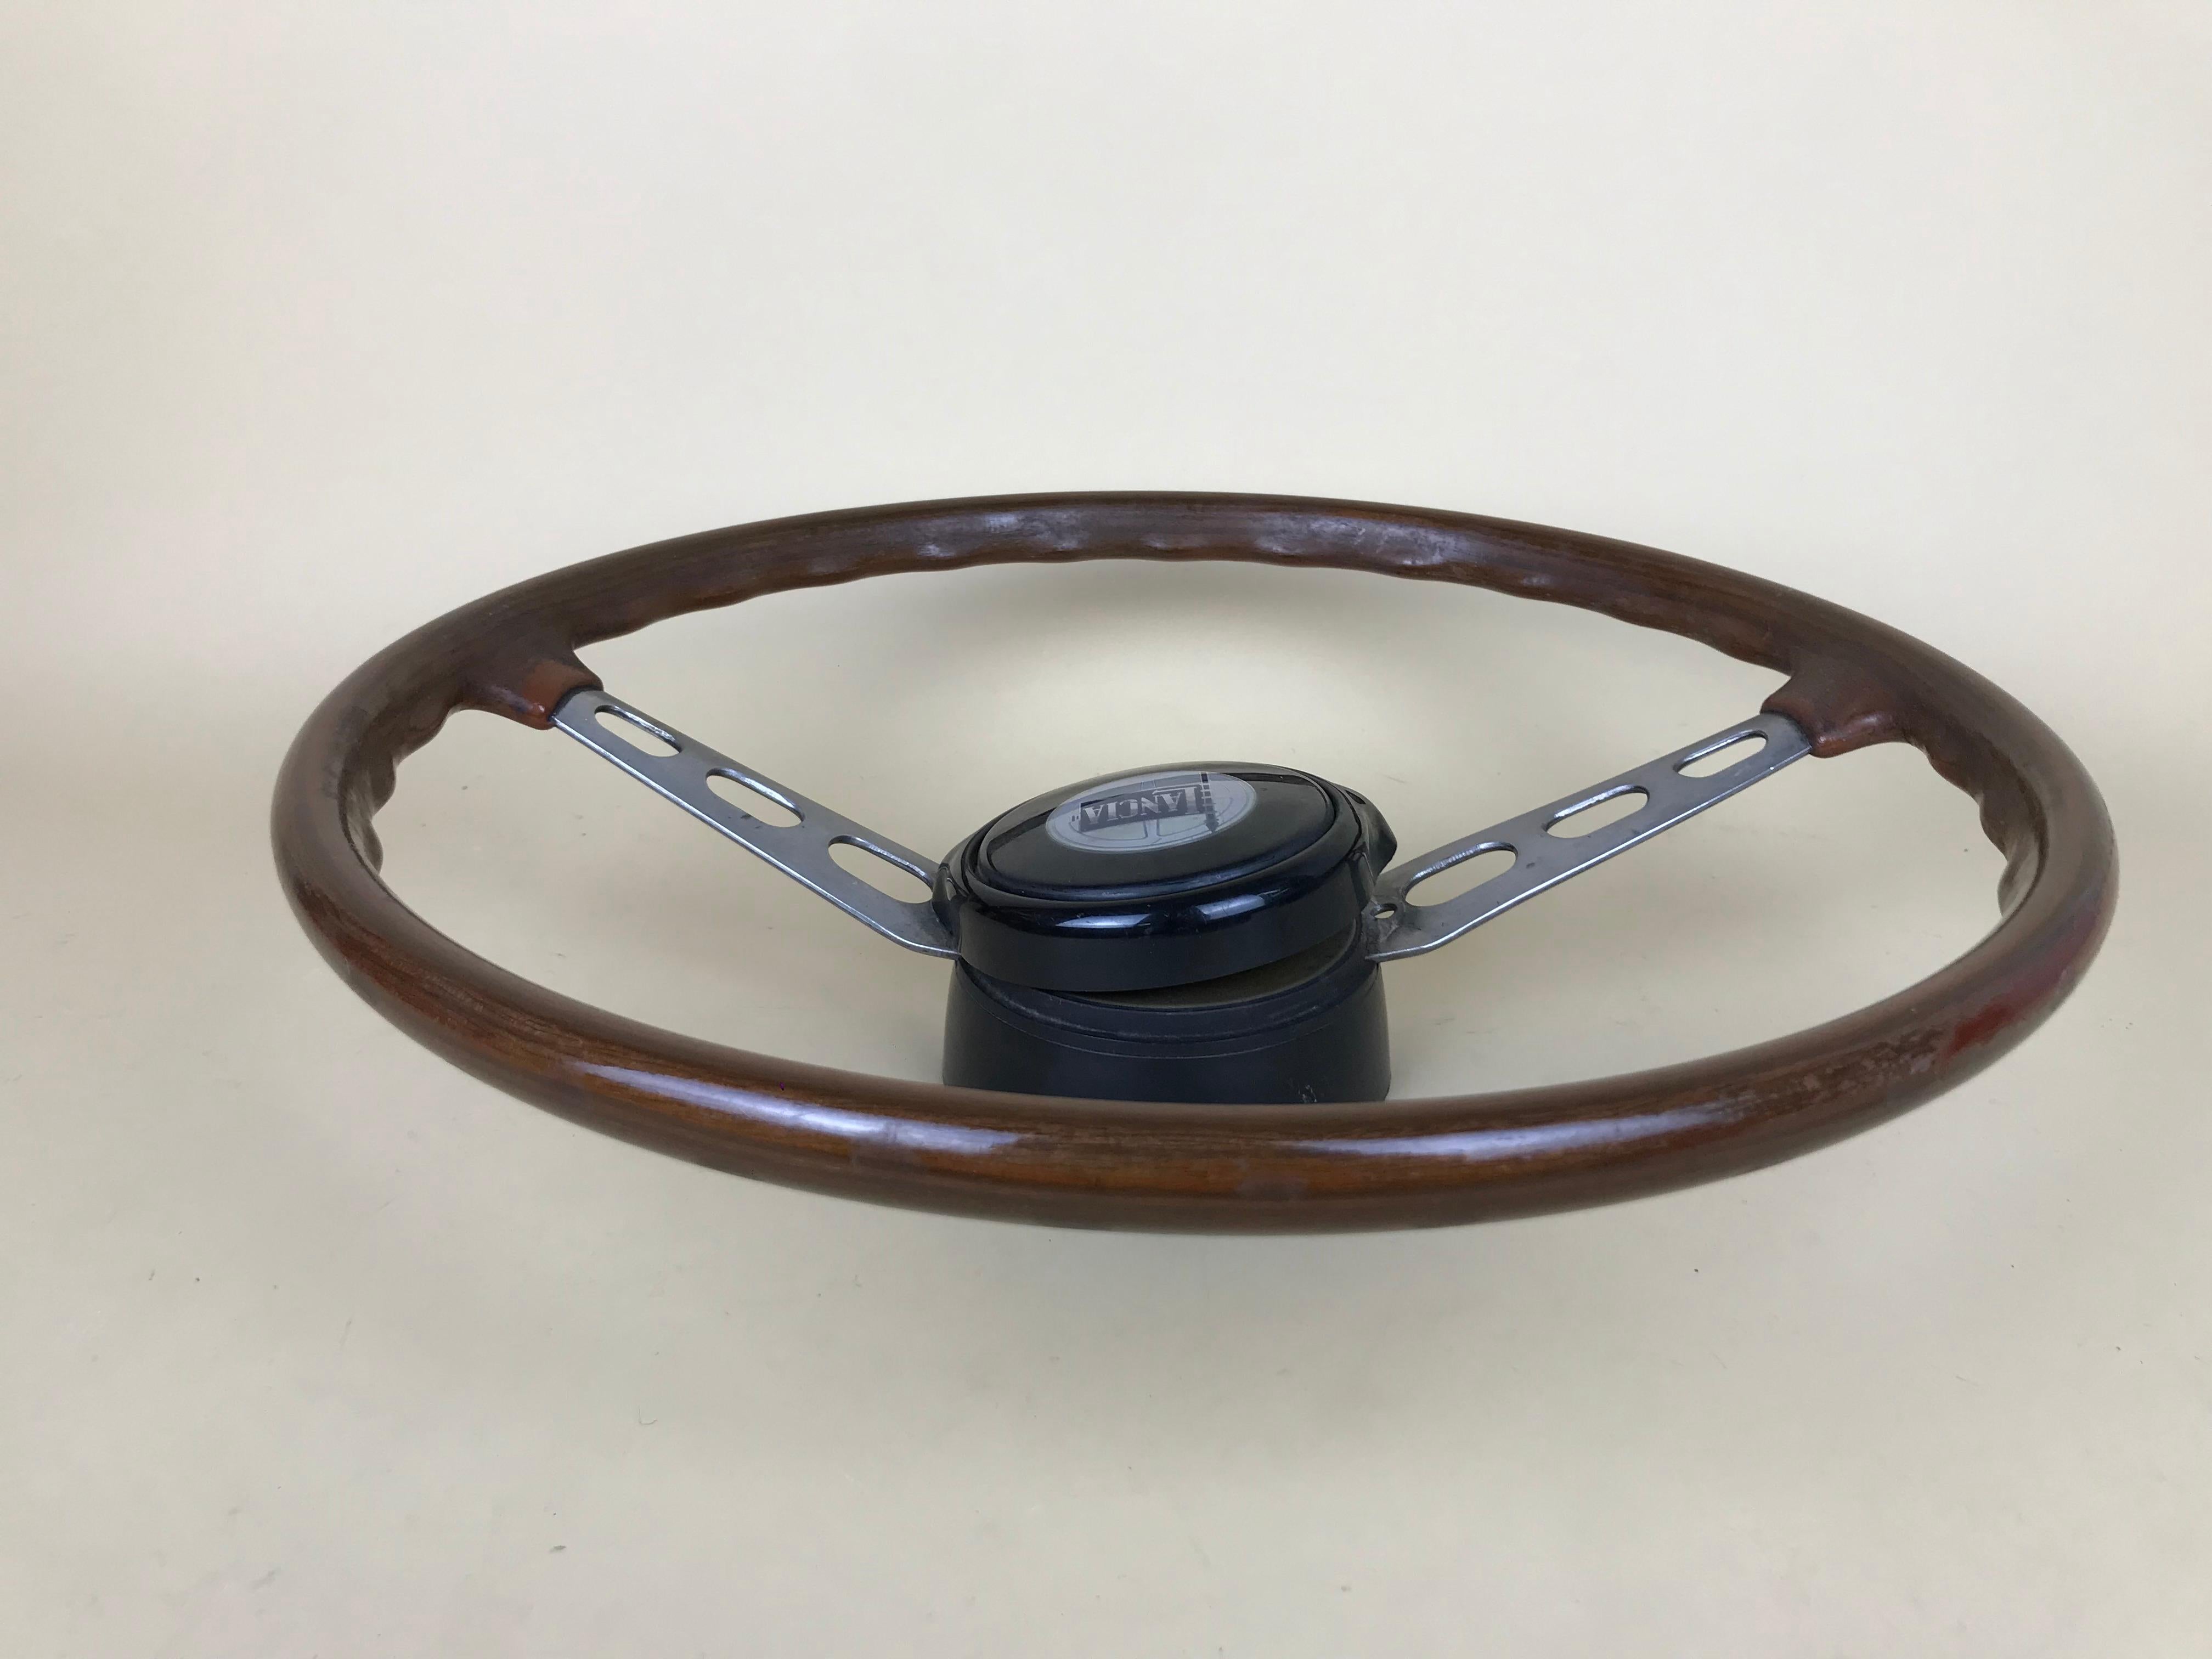 1960s Vintage Wooden and Metal Lancia Steering Wheel Made in Italy For Sale 3